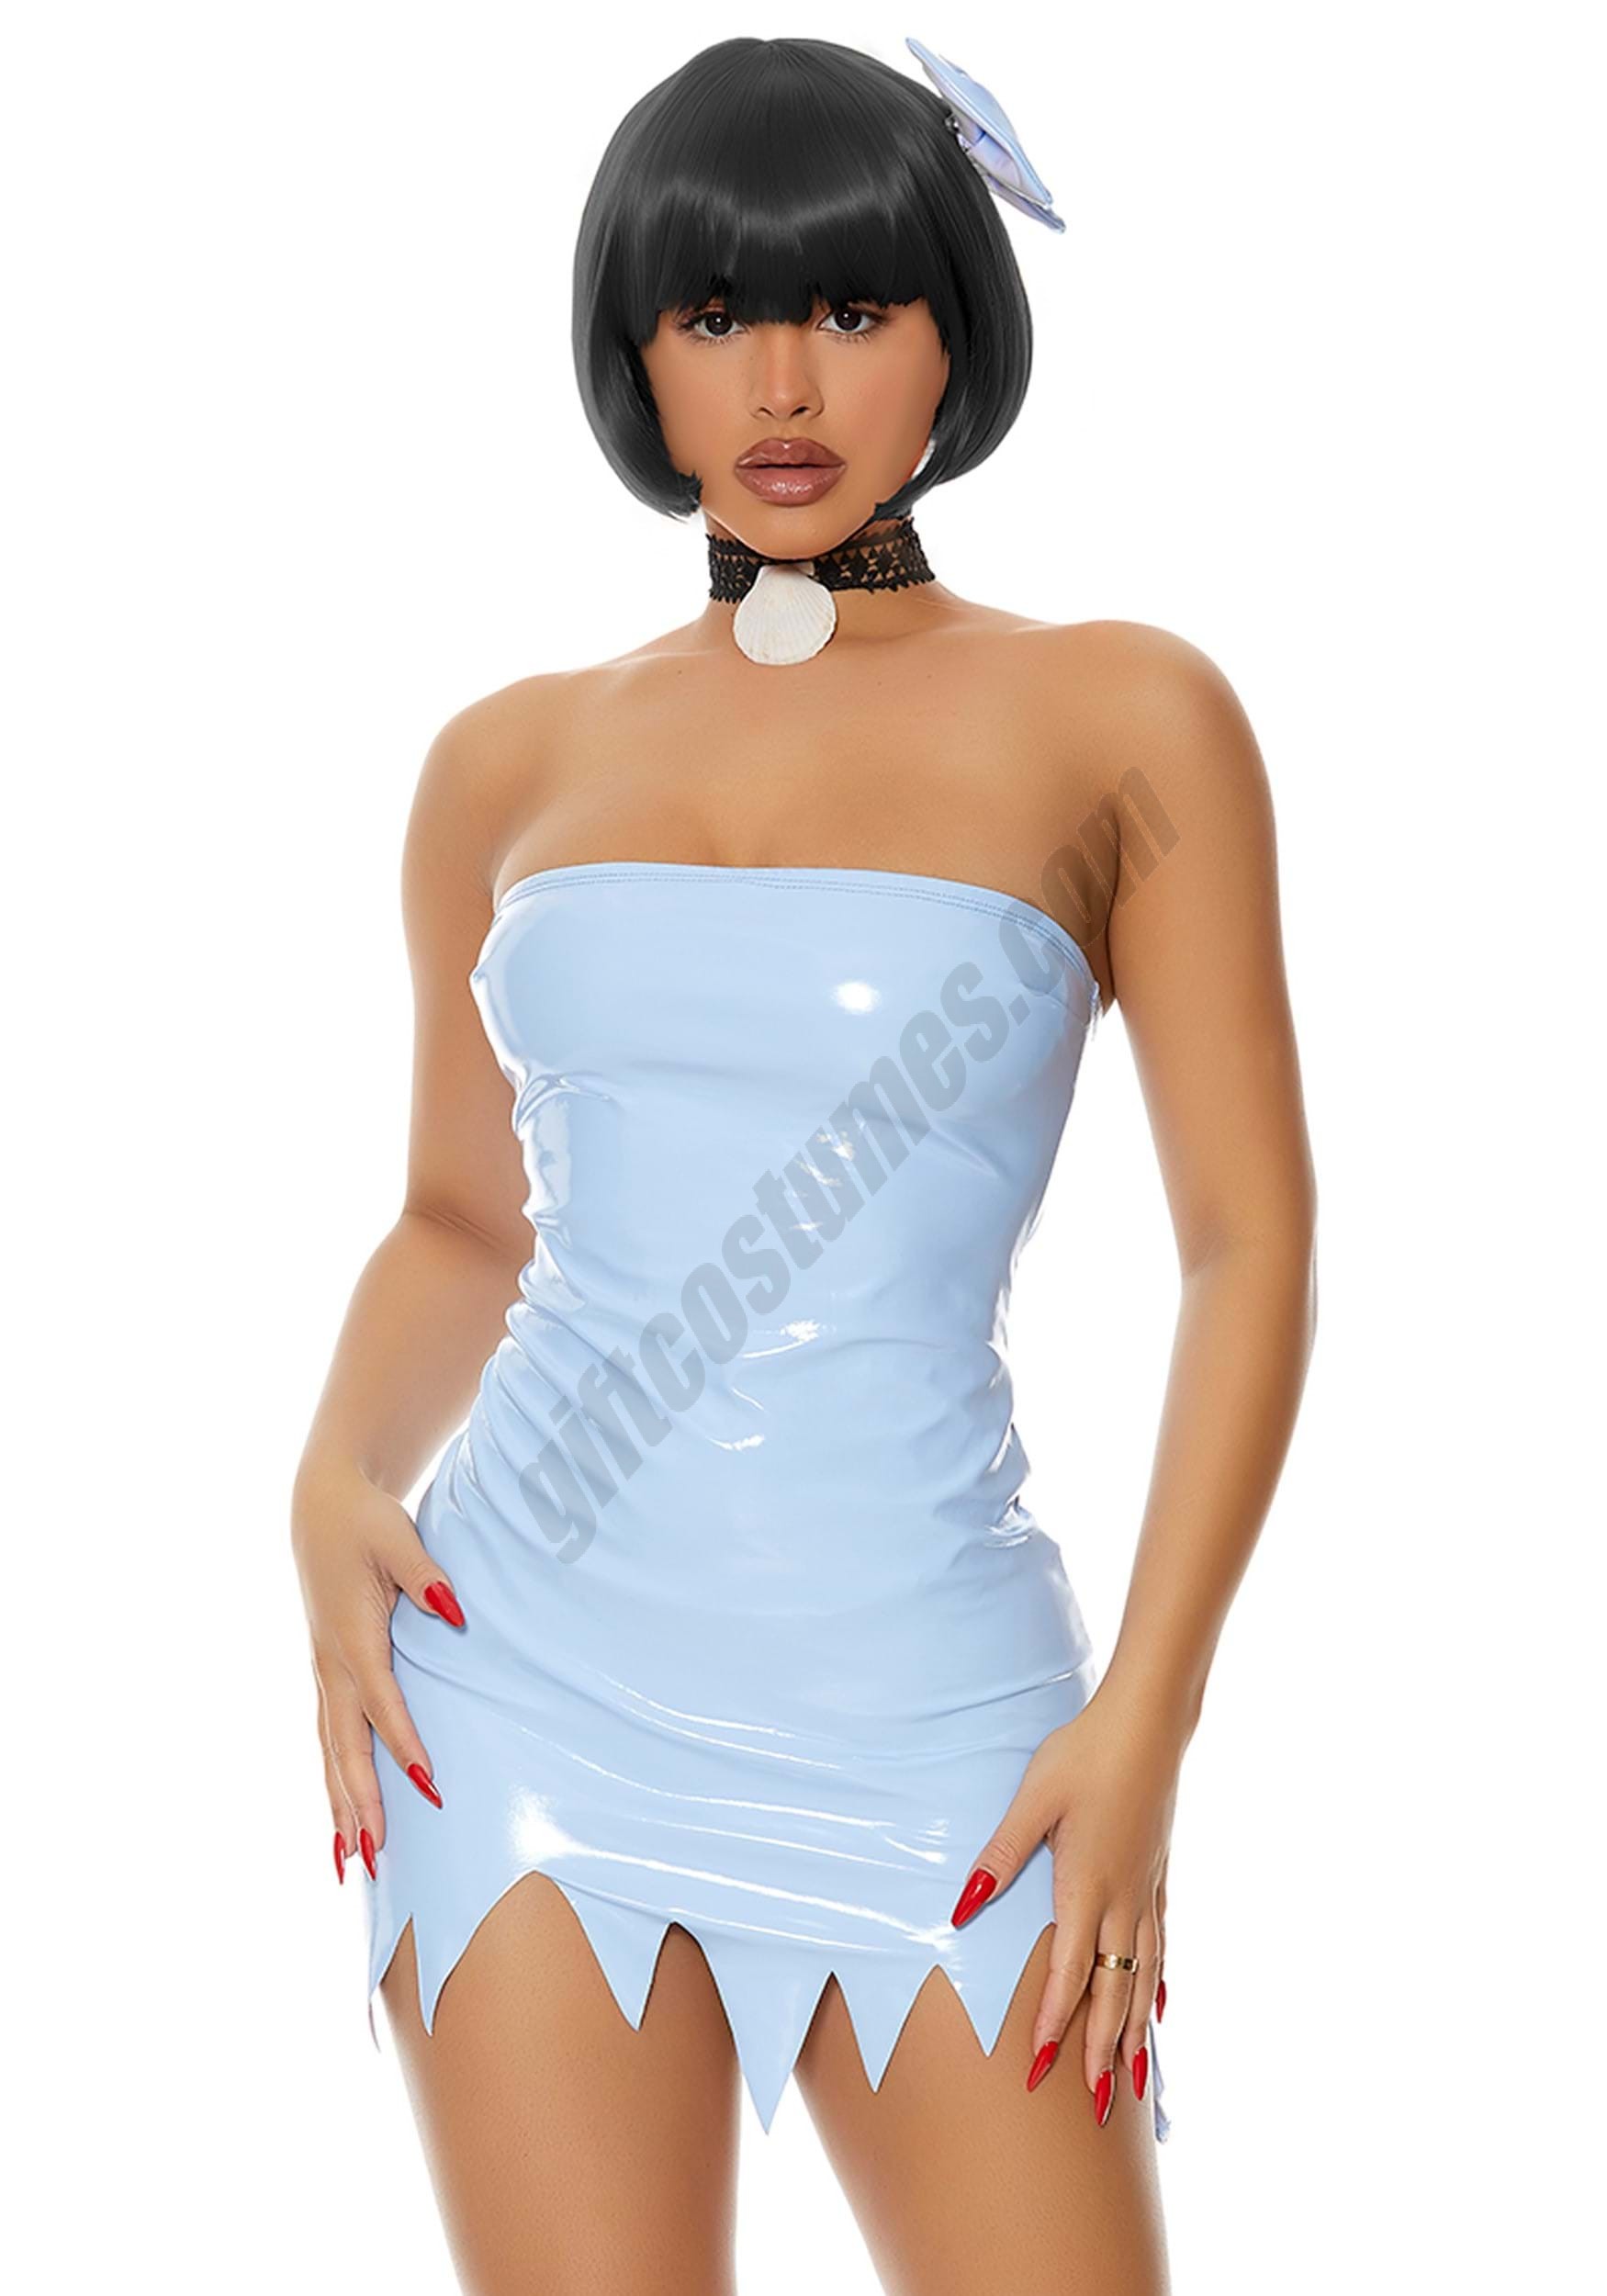 Sexy That's My Best Friend Betty Costume for Women - Sexy That's My Best Friend Betty Costume for Women